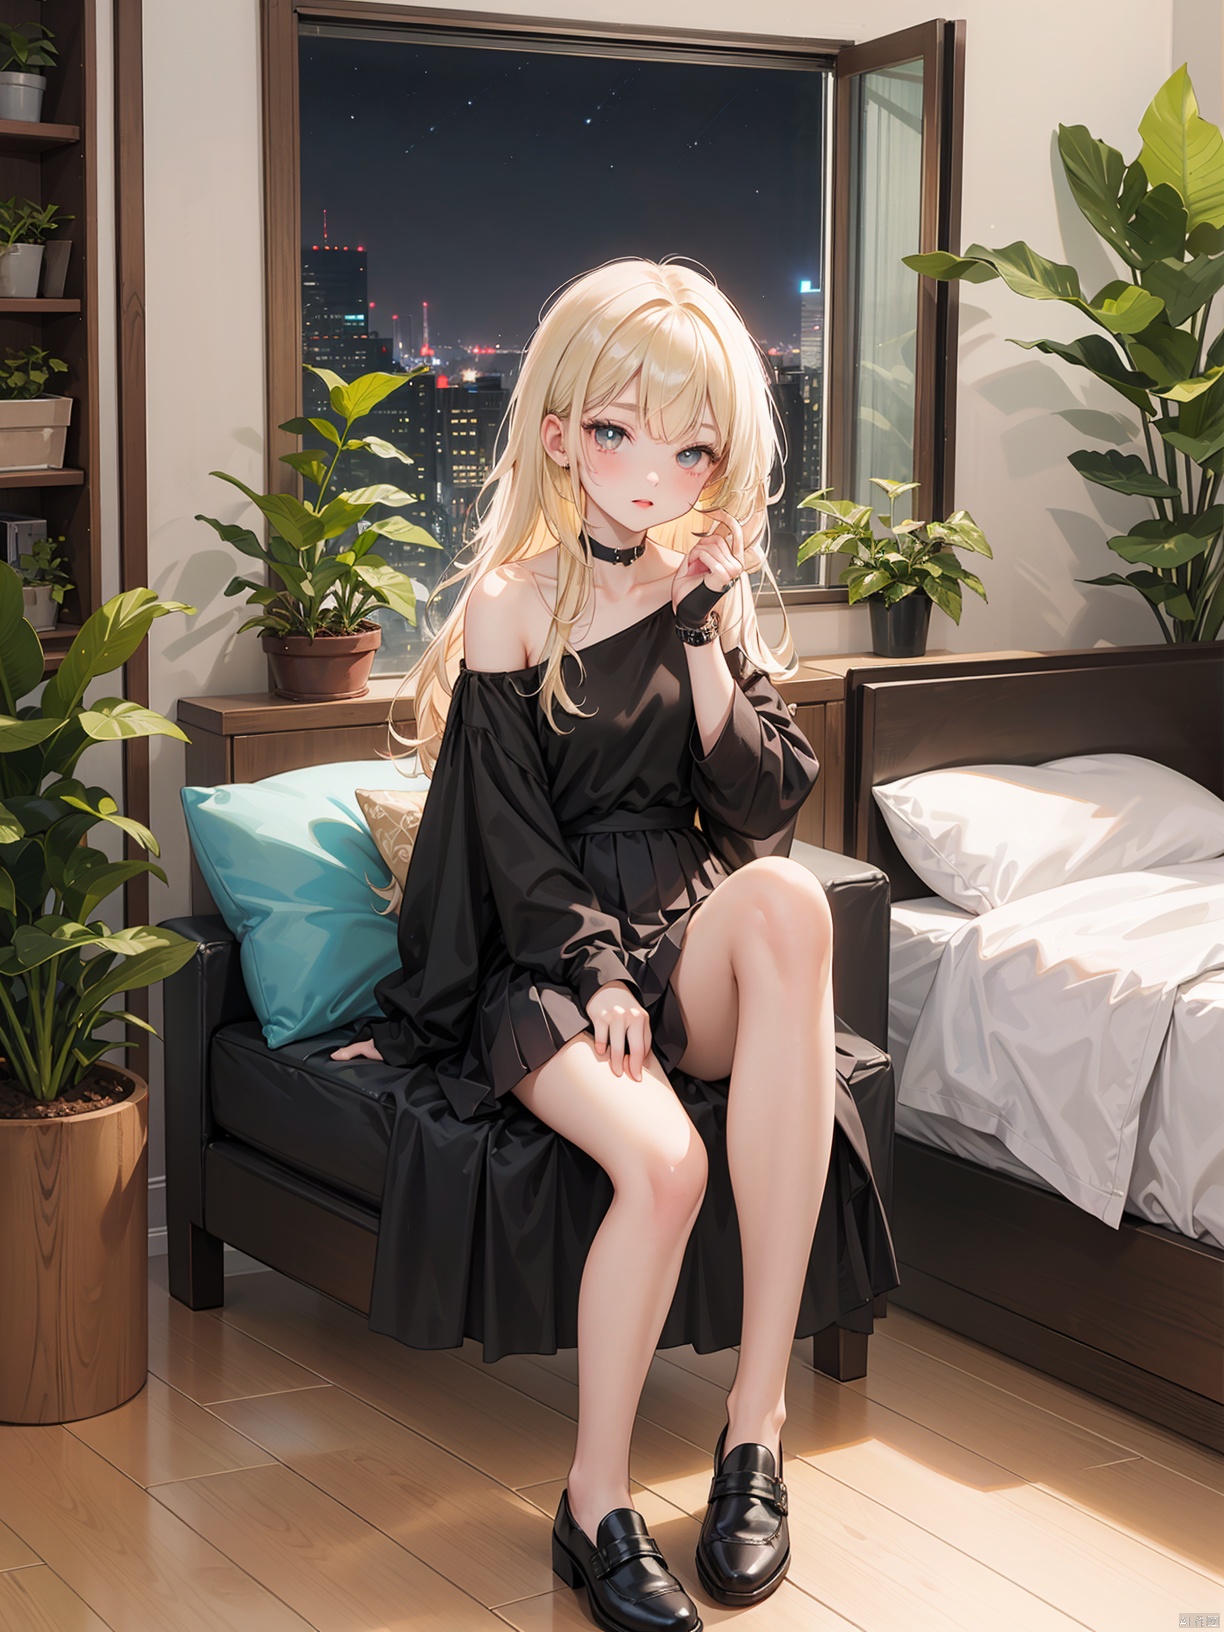  Beautiful figure, bangs, long hair, black eye,night, sitting in the room, bedroom, interior design, indoor plants, outdoor view, blonde hair, rose red pupils, girl, full body photo, leg rings, black top, long hem, covering hands, red skirt, short hem, revealing collarbone, off the shoulder, small leather shoes